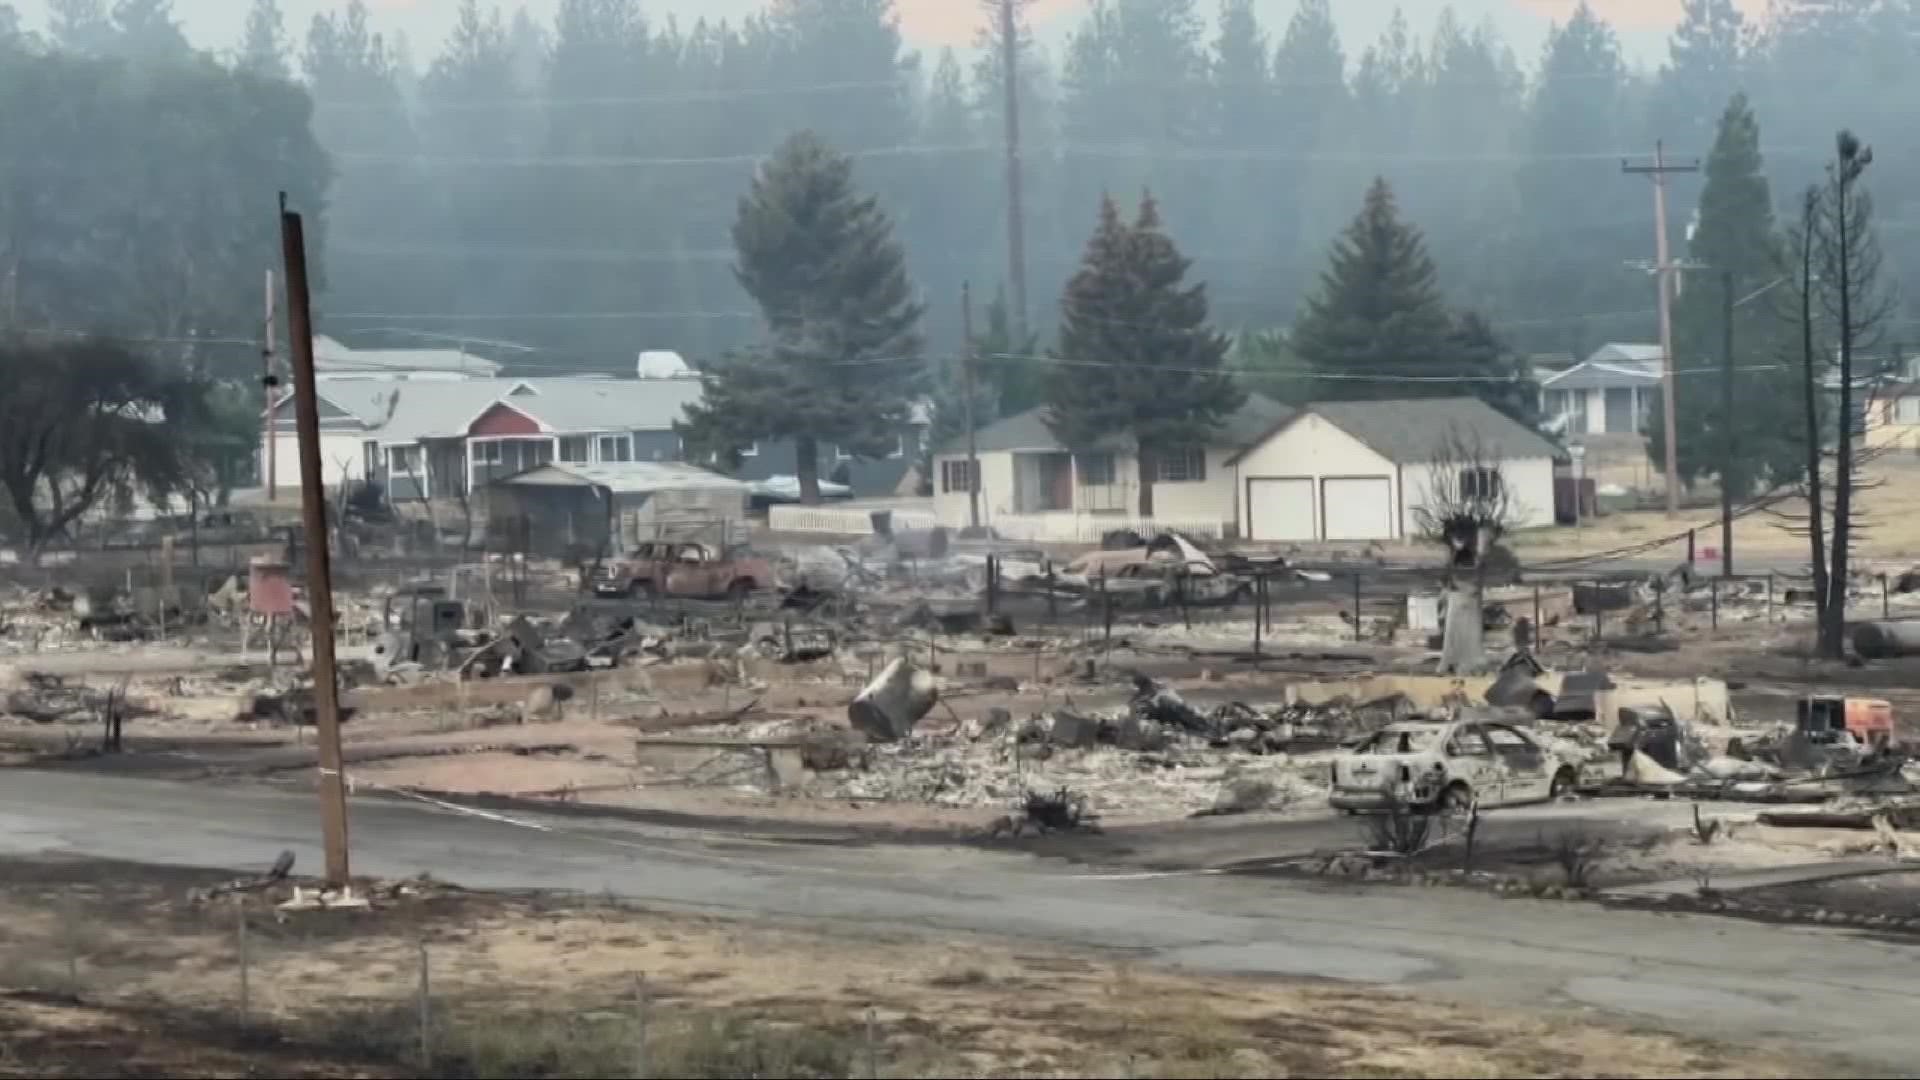 Two people are injured, over 100 homes are destroyed, and several thousand people have been evacuated from the county just south of the Oregon border.